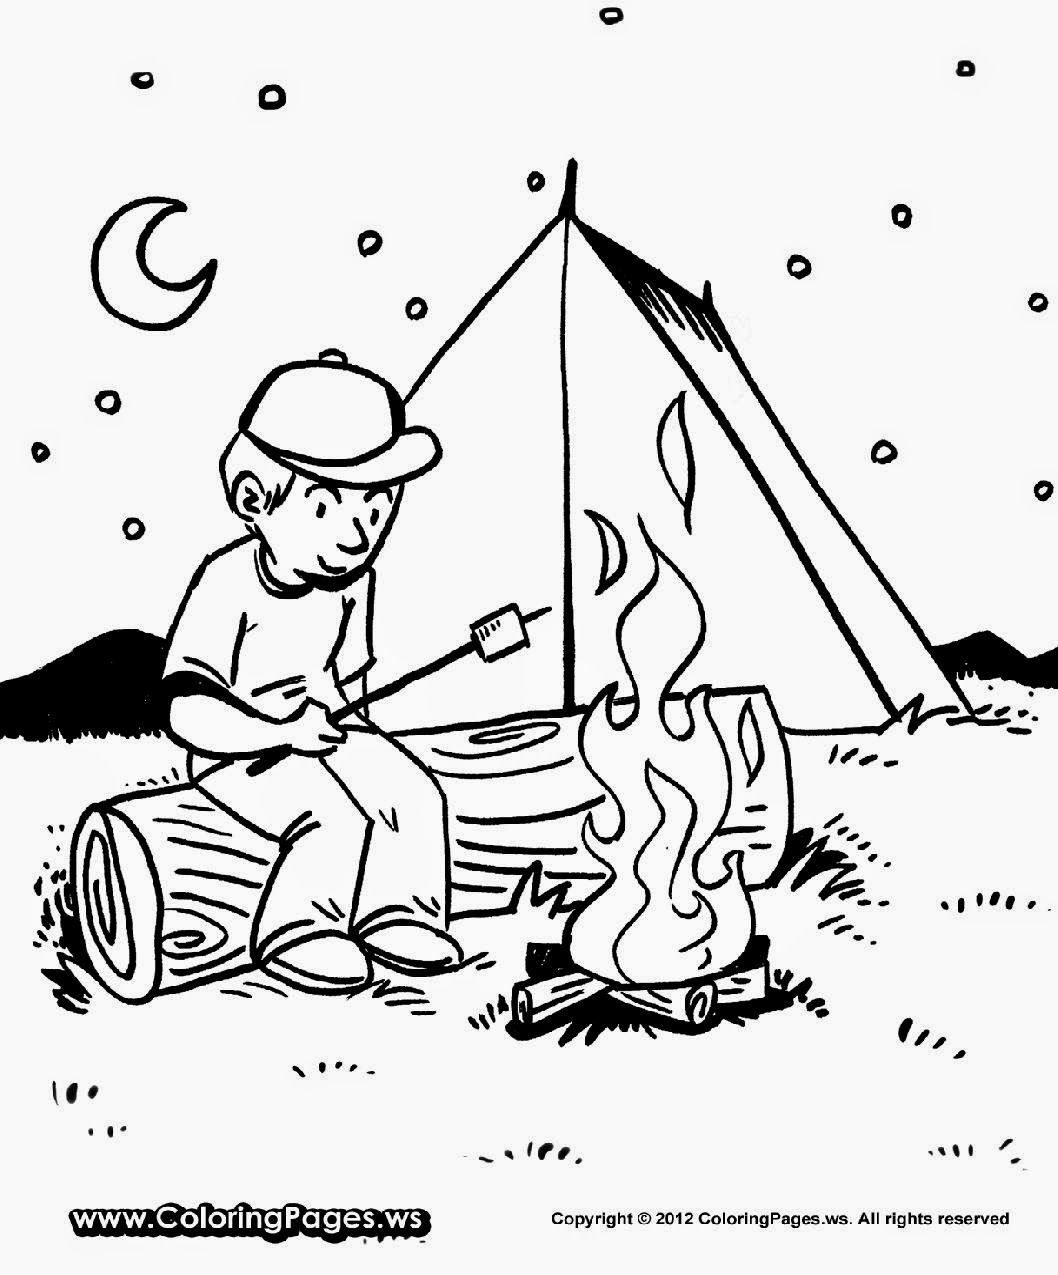 Camping - Coloring Pages for Kids and for Adults